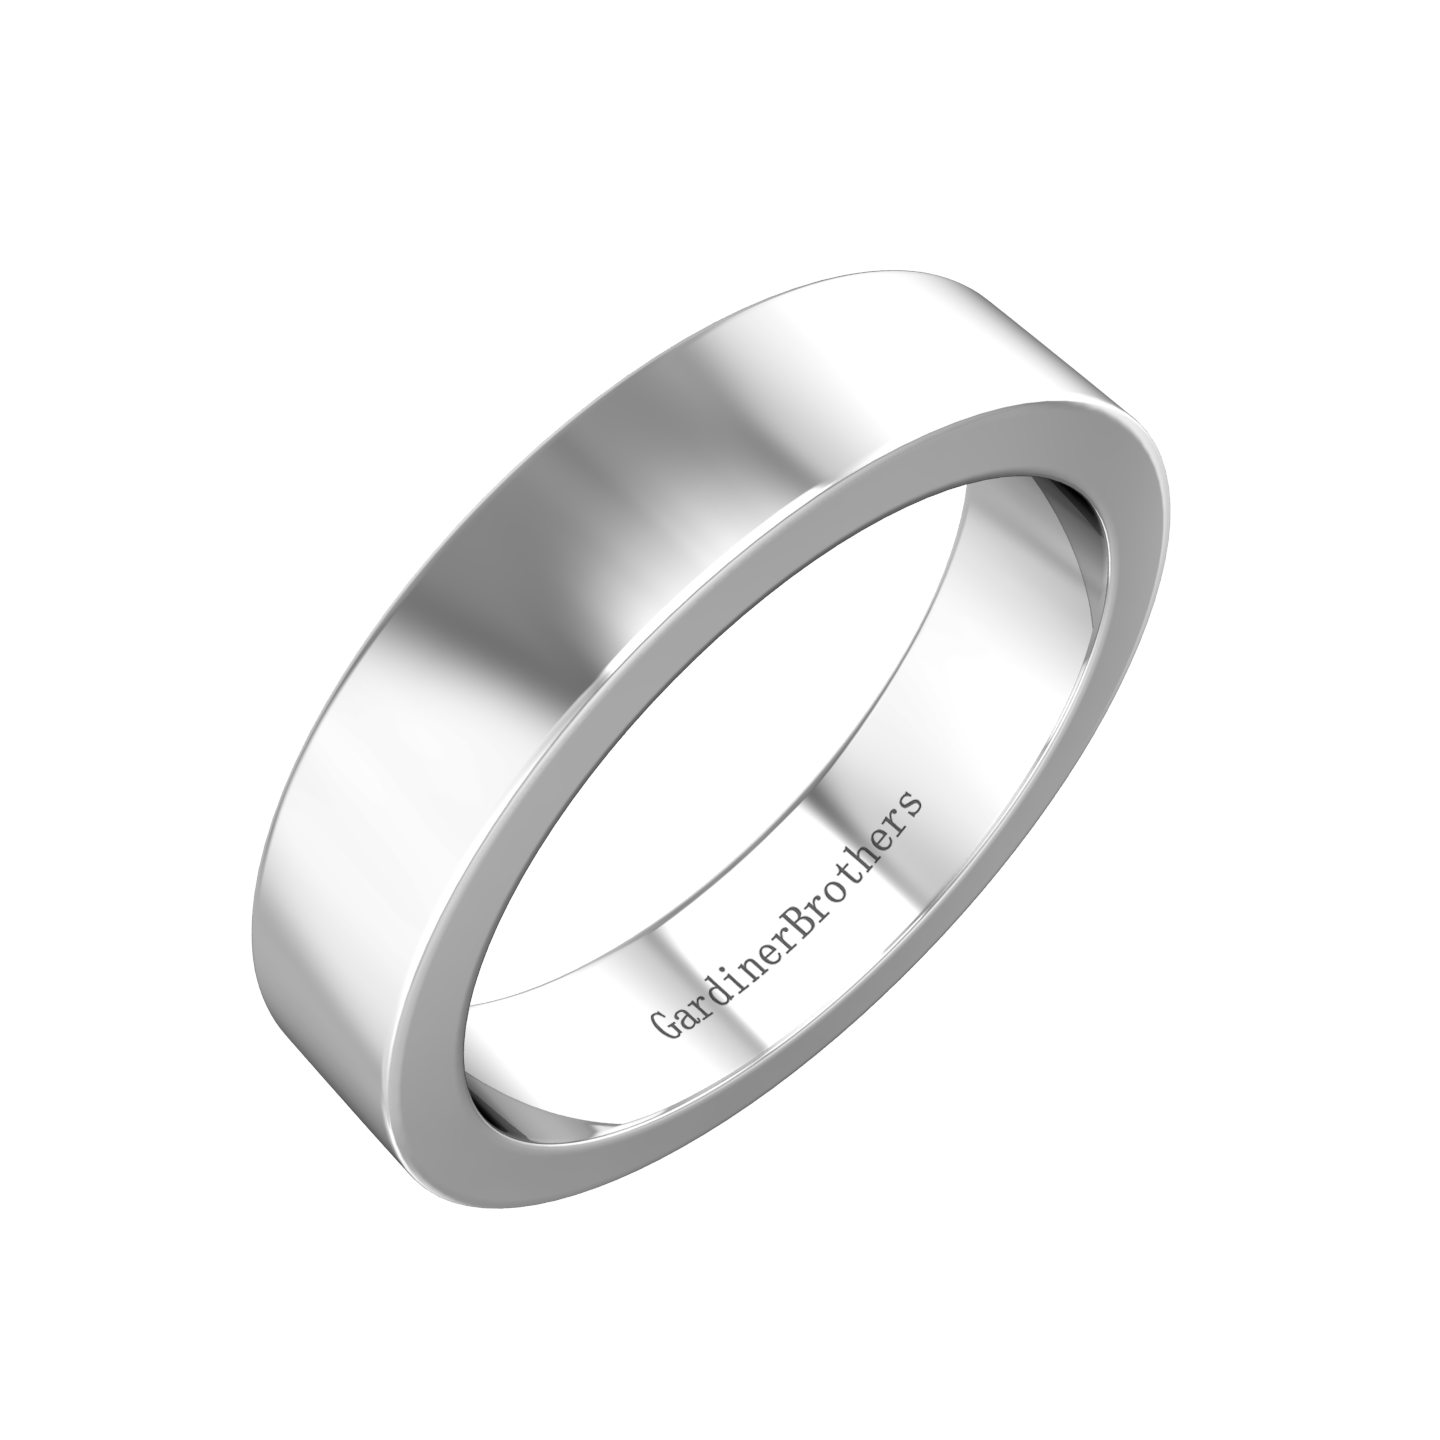 Plain Wedding Ring With A Flat Profile Inside and Out  Gardiner Brothers   